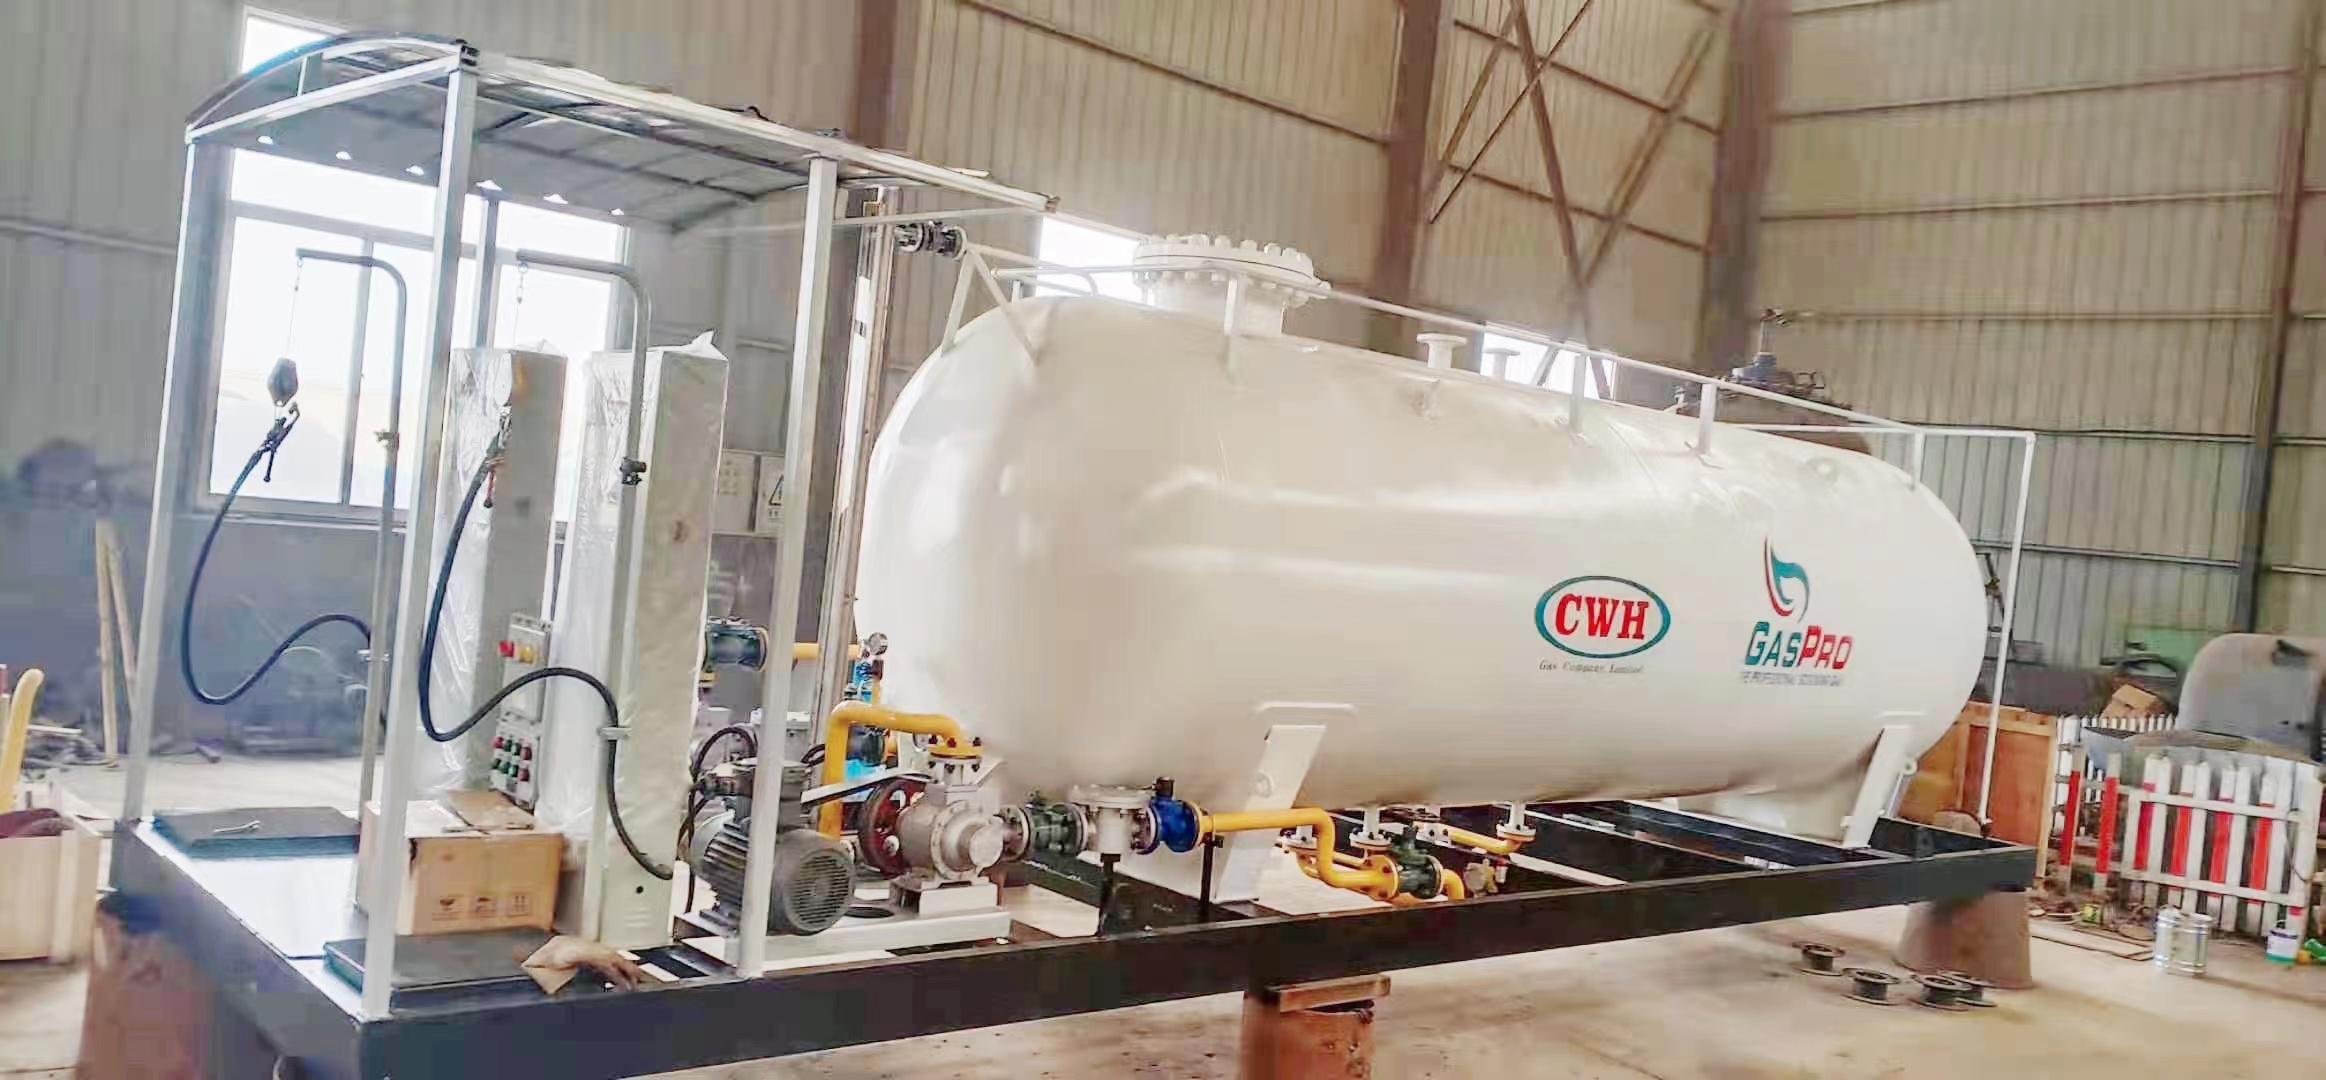 Conventional LPG gasification stations require cryogenic storage tanks